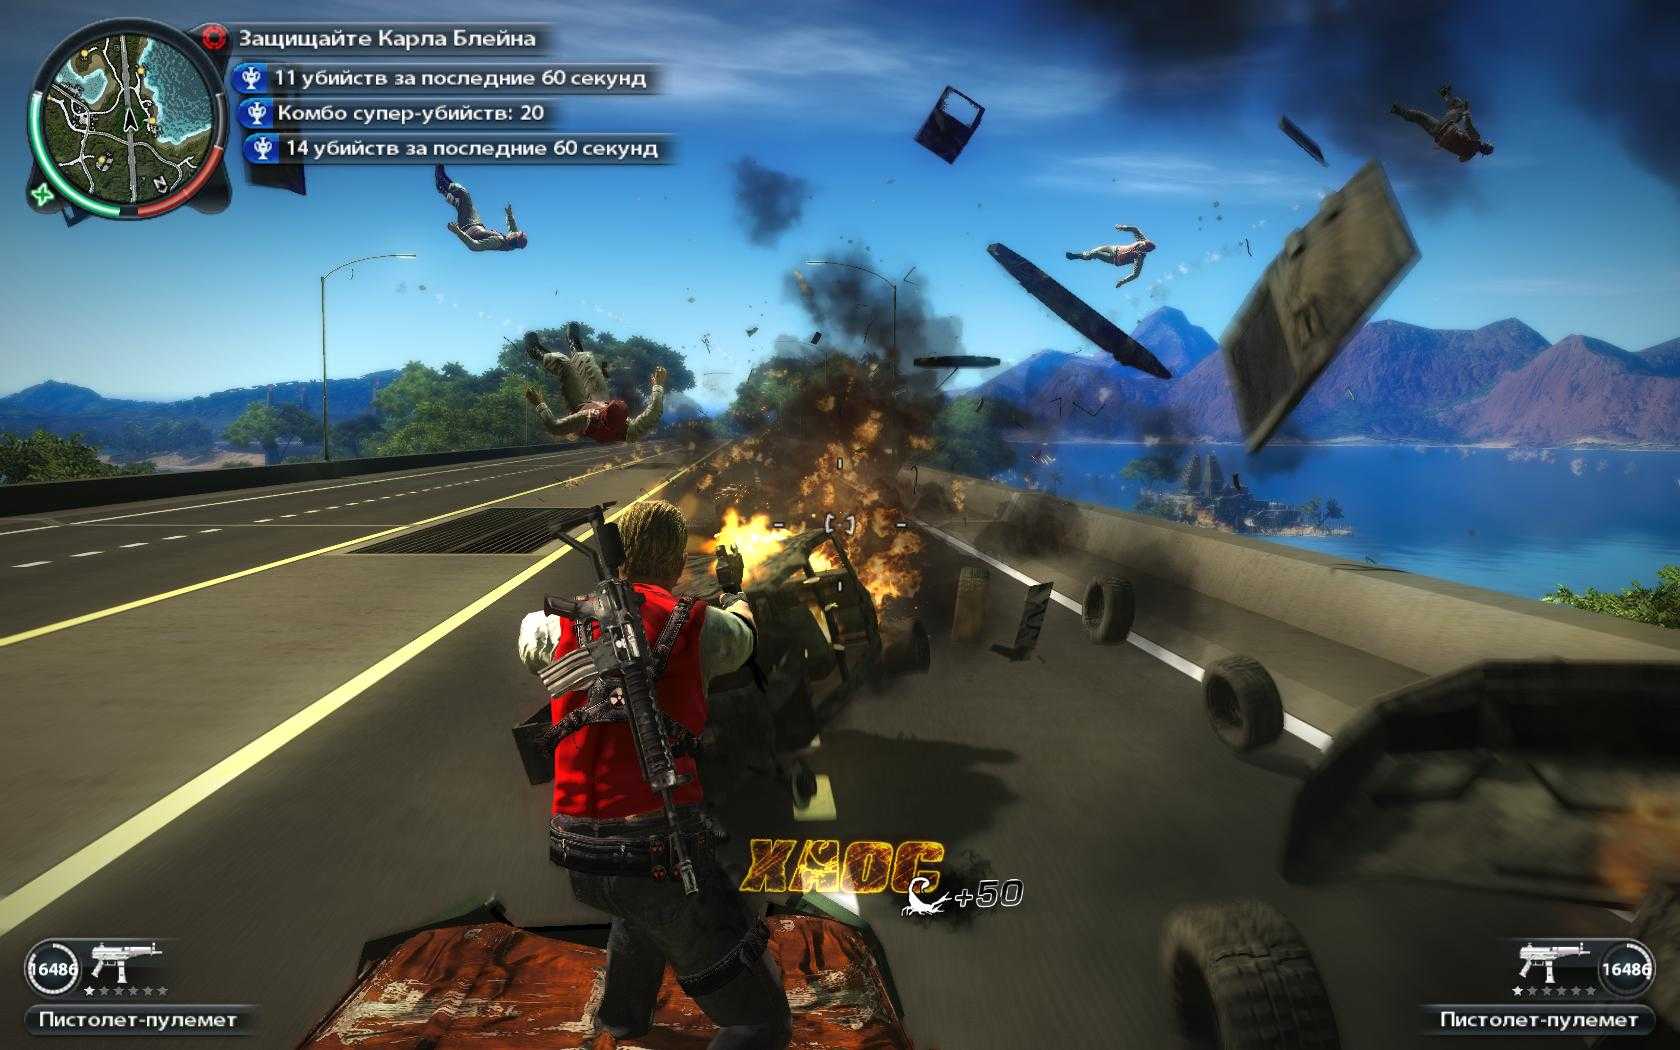 Gb games download. Игра just cause 2. 2.1 Just cause (2006). Just cause 2 Скорпион. Just cause 2 - Immortal 3.